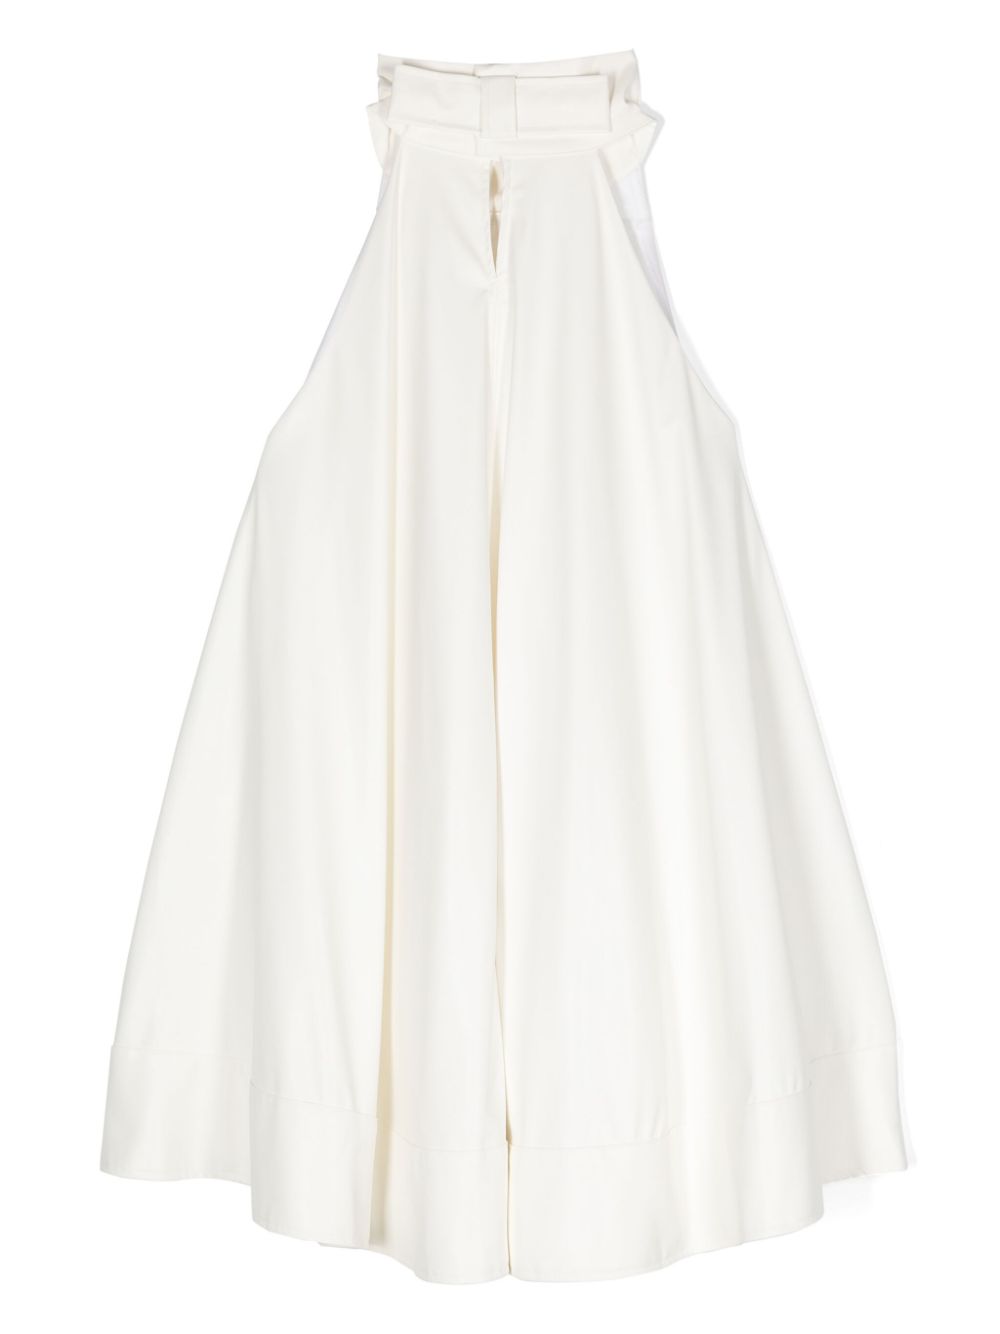 White dress for girls with logo